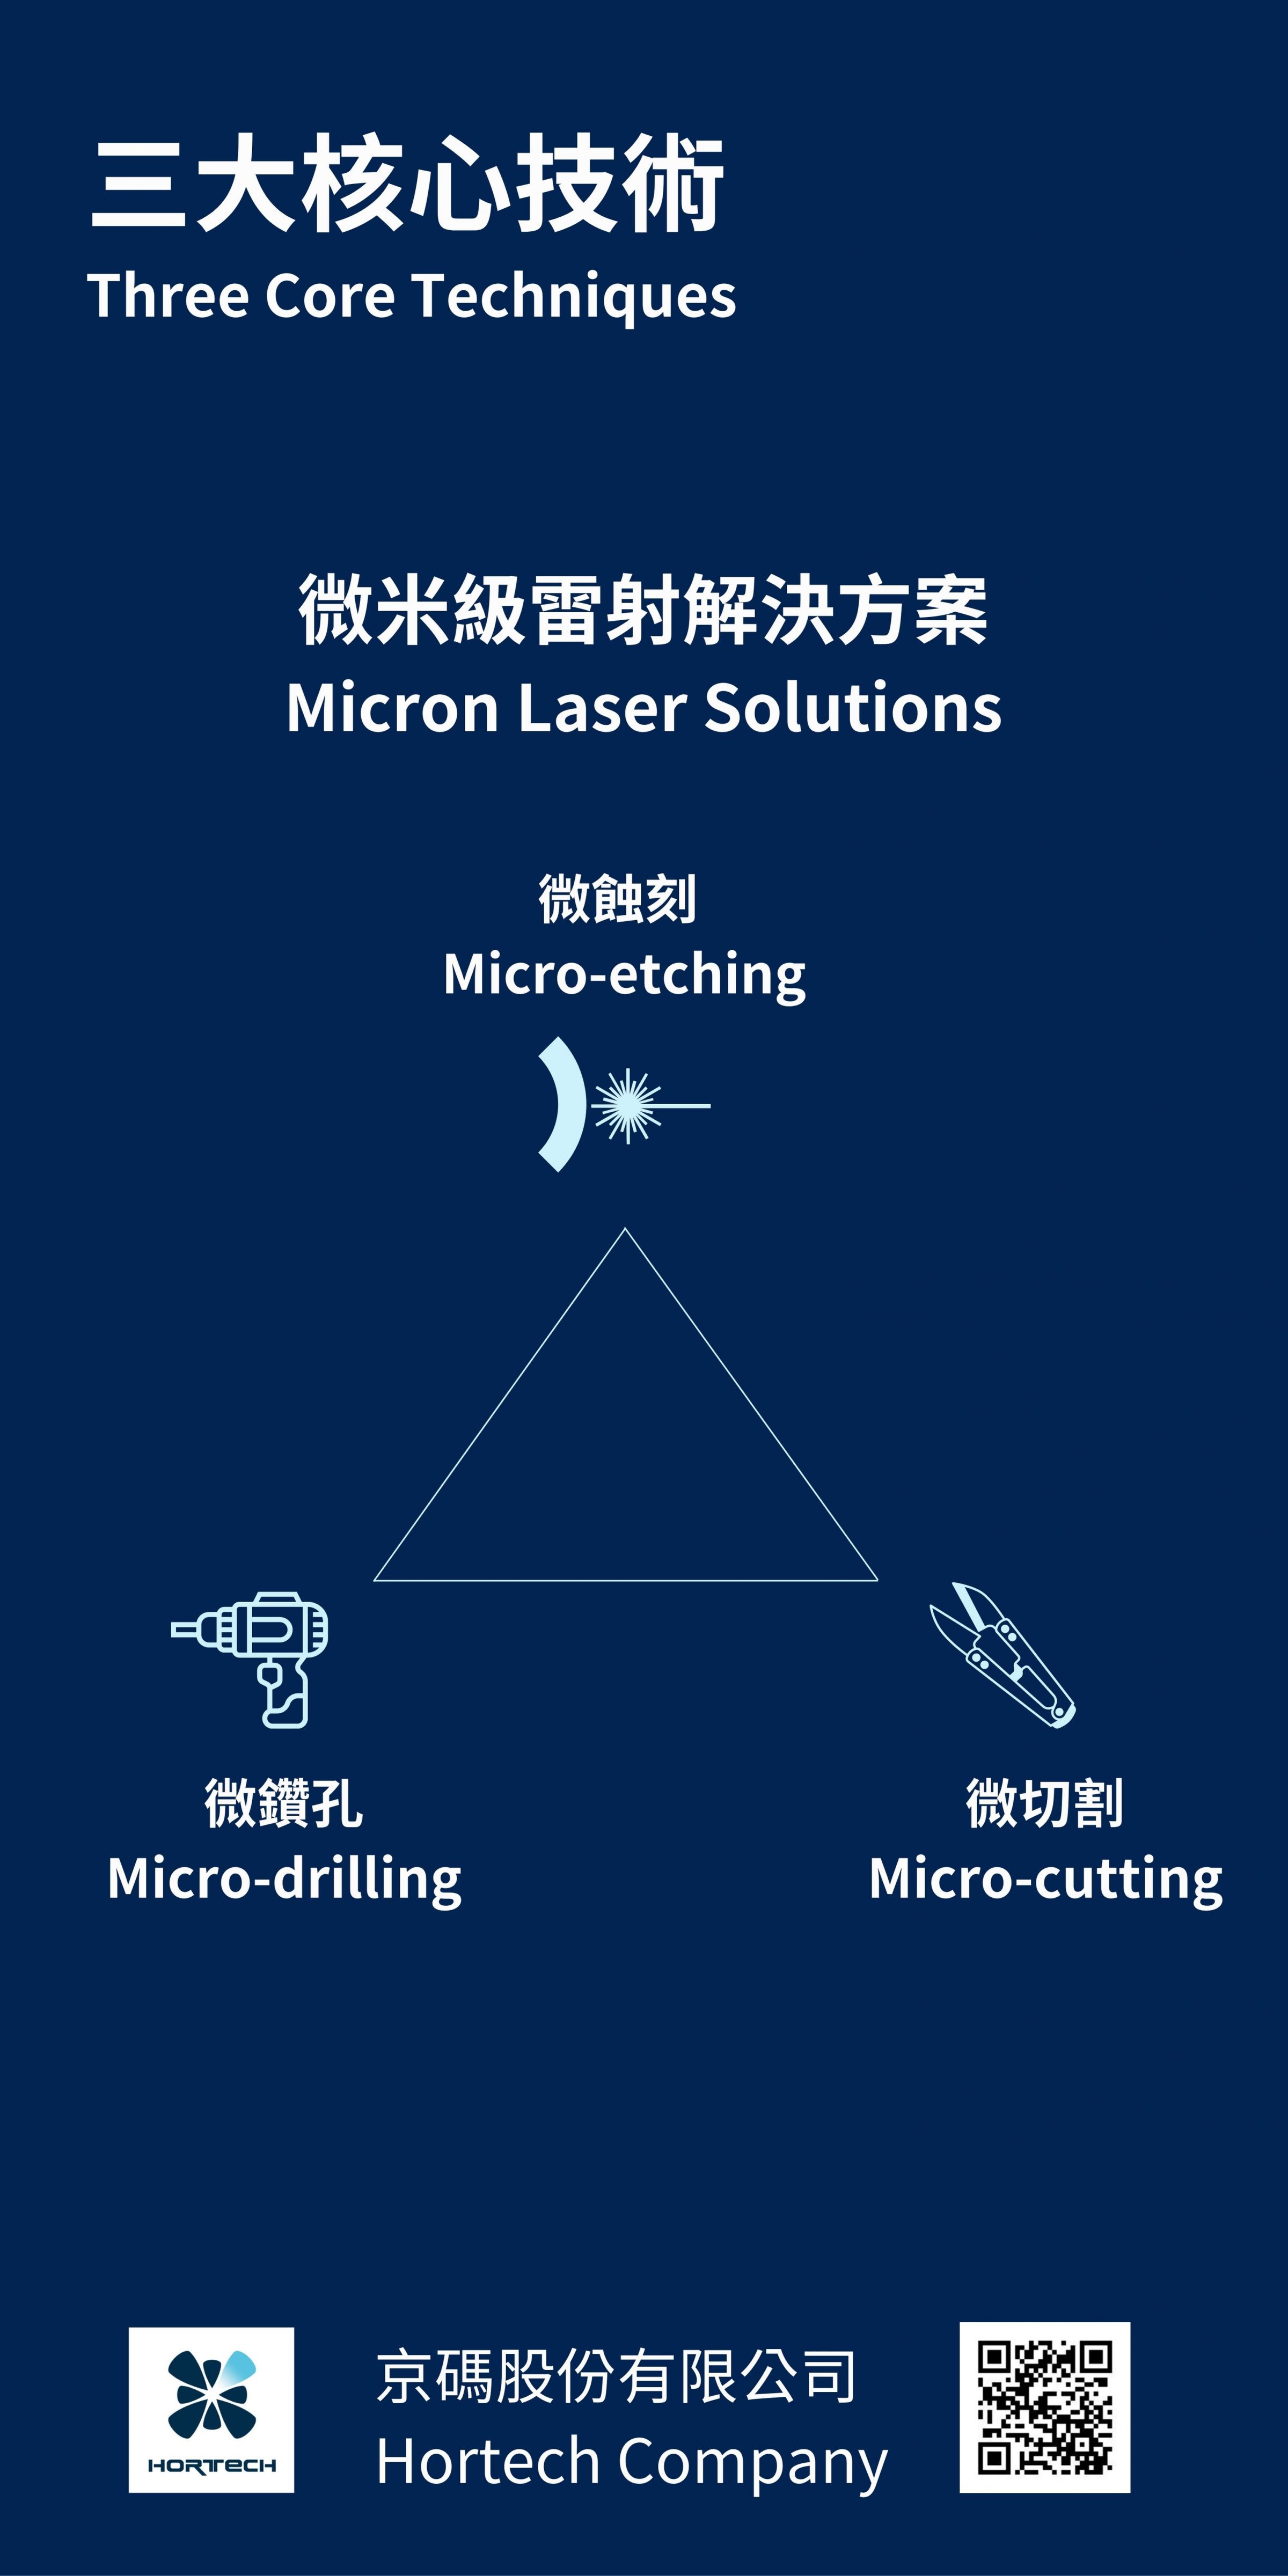 2023 Laser Taiwan
Date: Wednesday, Aug. 23 - Saturday, Aug. 26, 2023
Time: 9:30 AM - 17:00 PM
Taipei Nangang Exhibition Center, Hall 2
Hortech's Booth: P1122